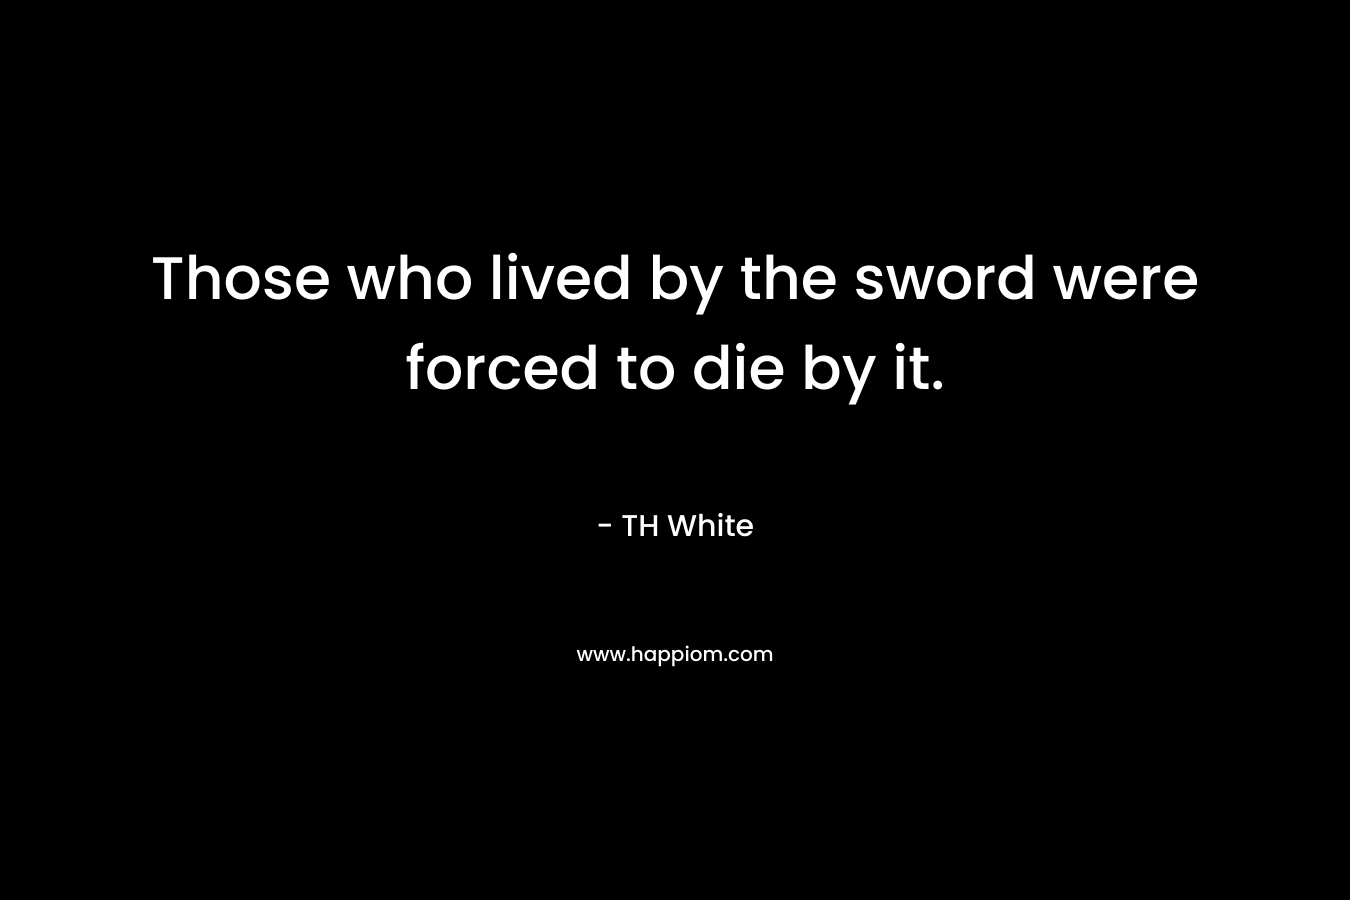 Those who lived by the sword were forced to die by it.